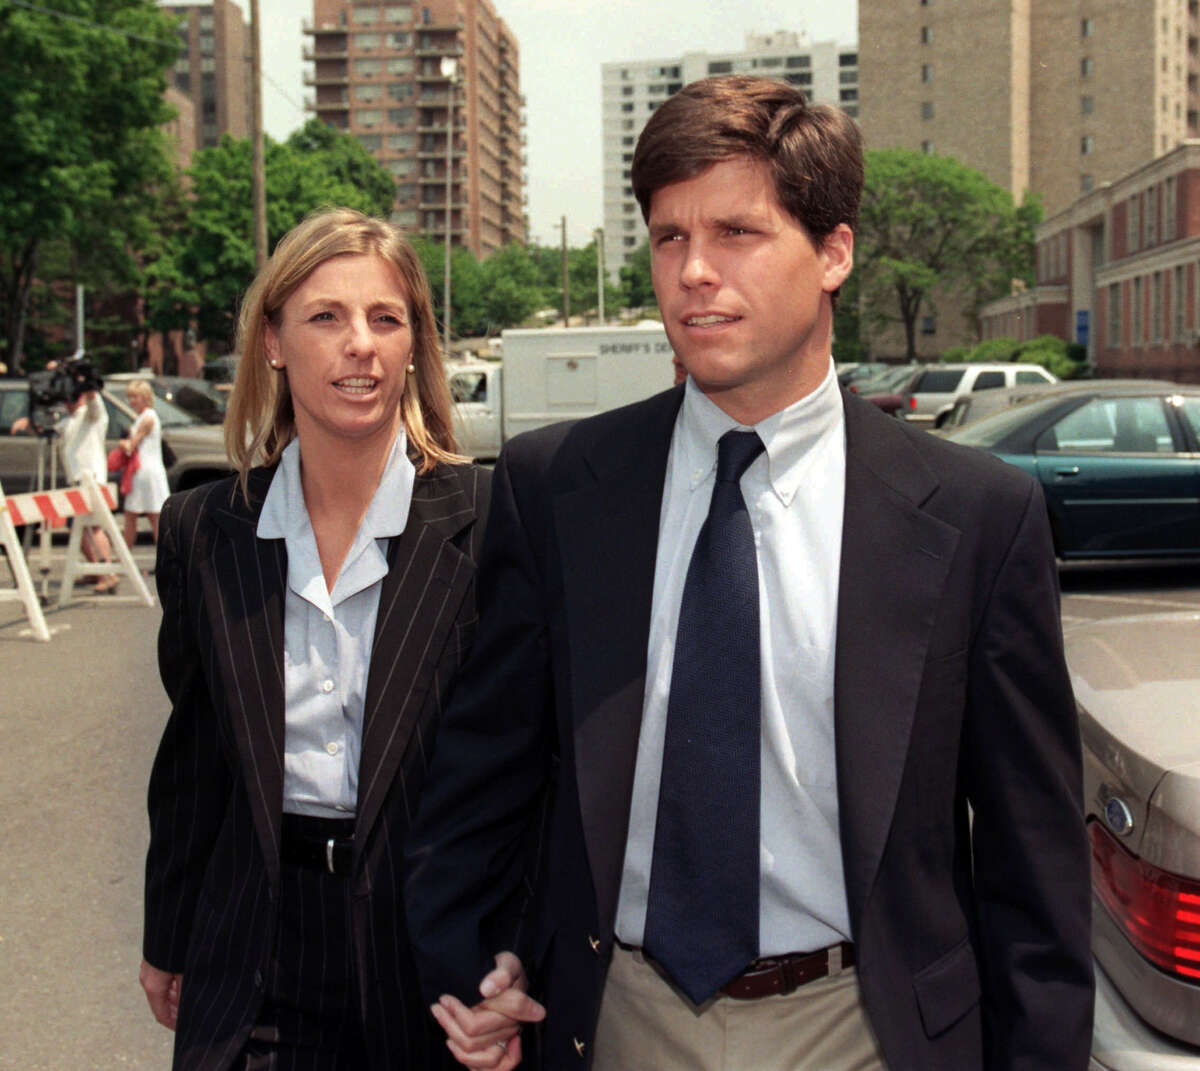 FILE - Alex Kelly walks with girlfriend Amy Molitor during a break for lunch at Stamford Superior Court in Stamford, Conn., Thursday, June 12, 1997. Kelly, 30, was convicted today in the 1986 rape of a Darien, Conn. high school student. (AP Photo/Richard Freeda)